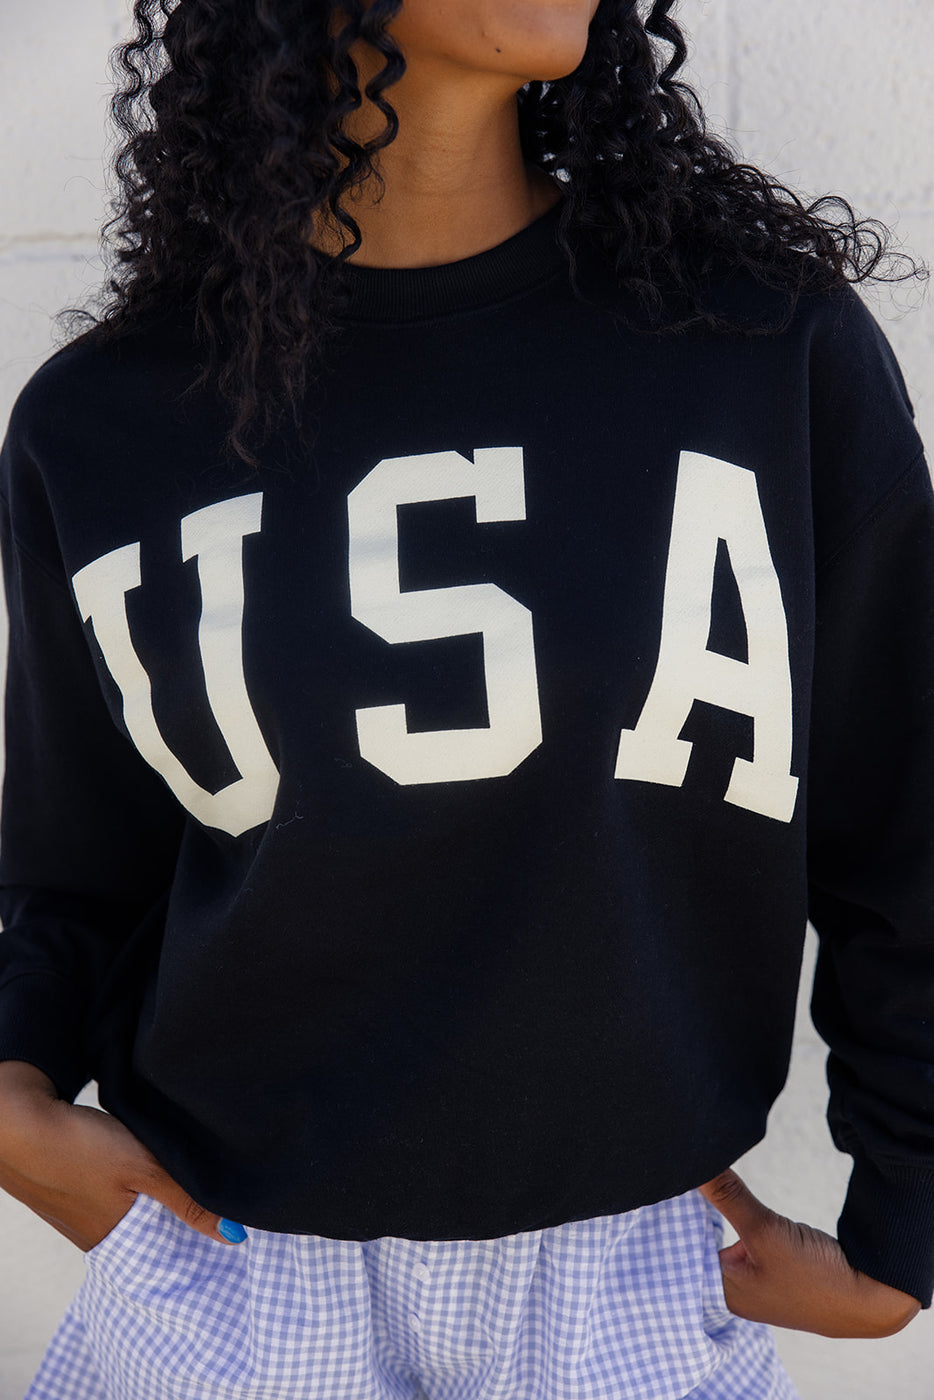 a person wearing a black sweatshirt with white letters on it